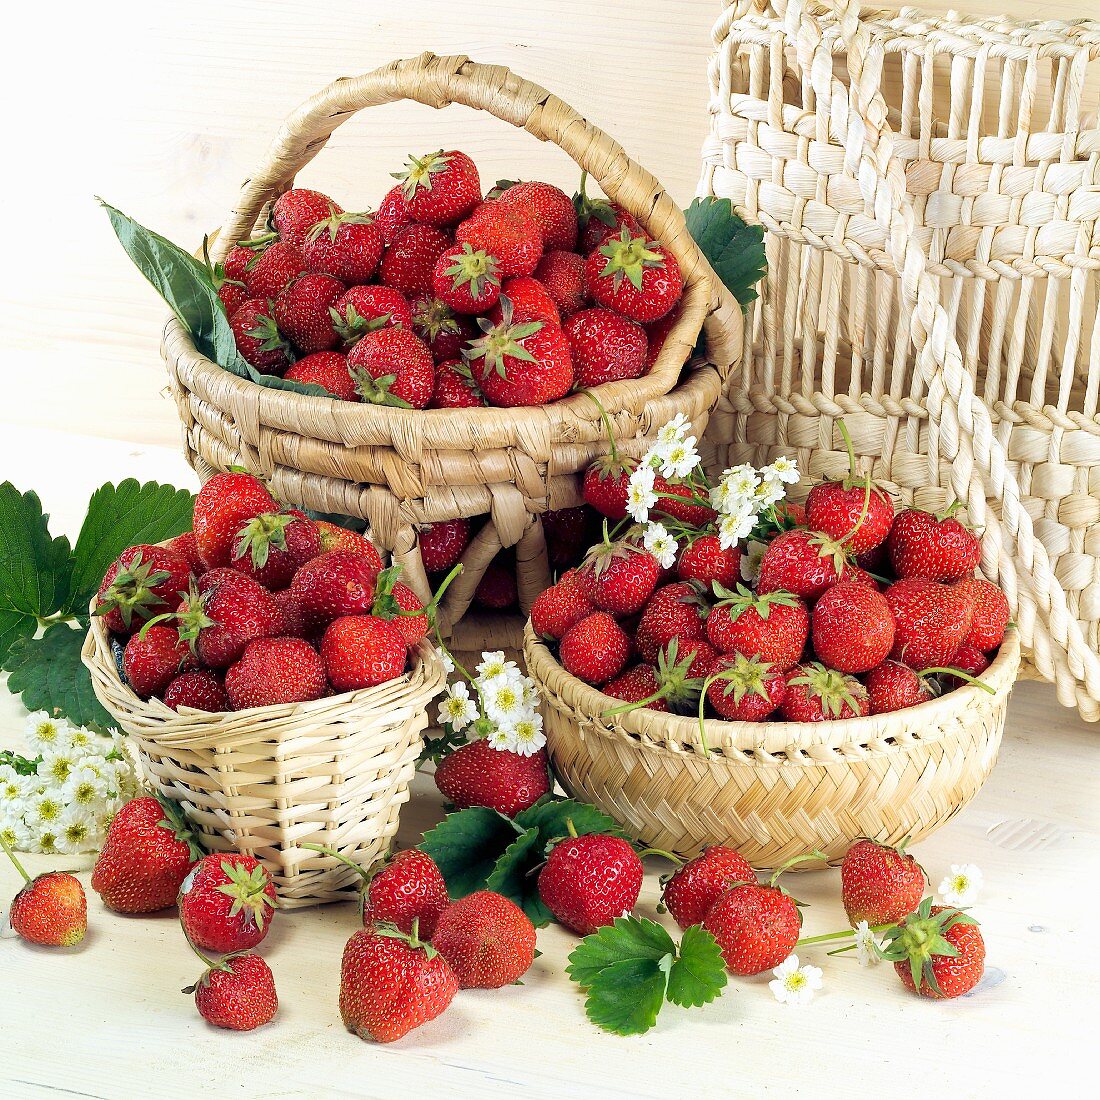 Fresh strawberries in and in front of three baskets